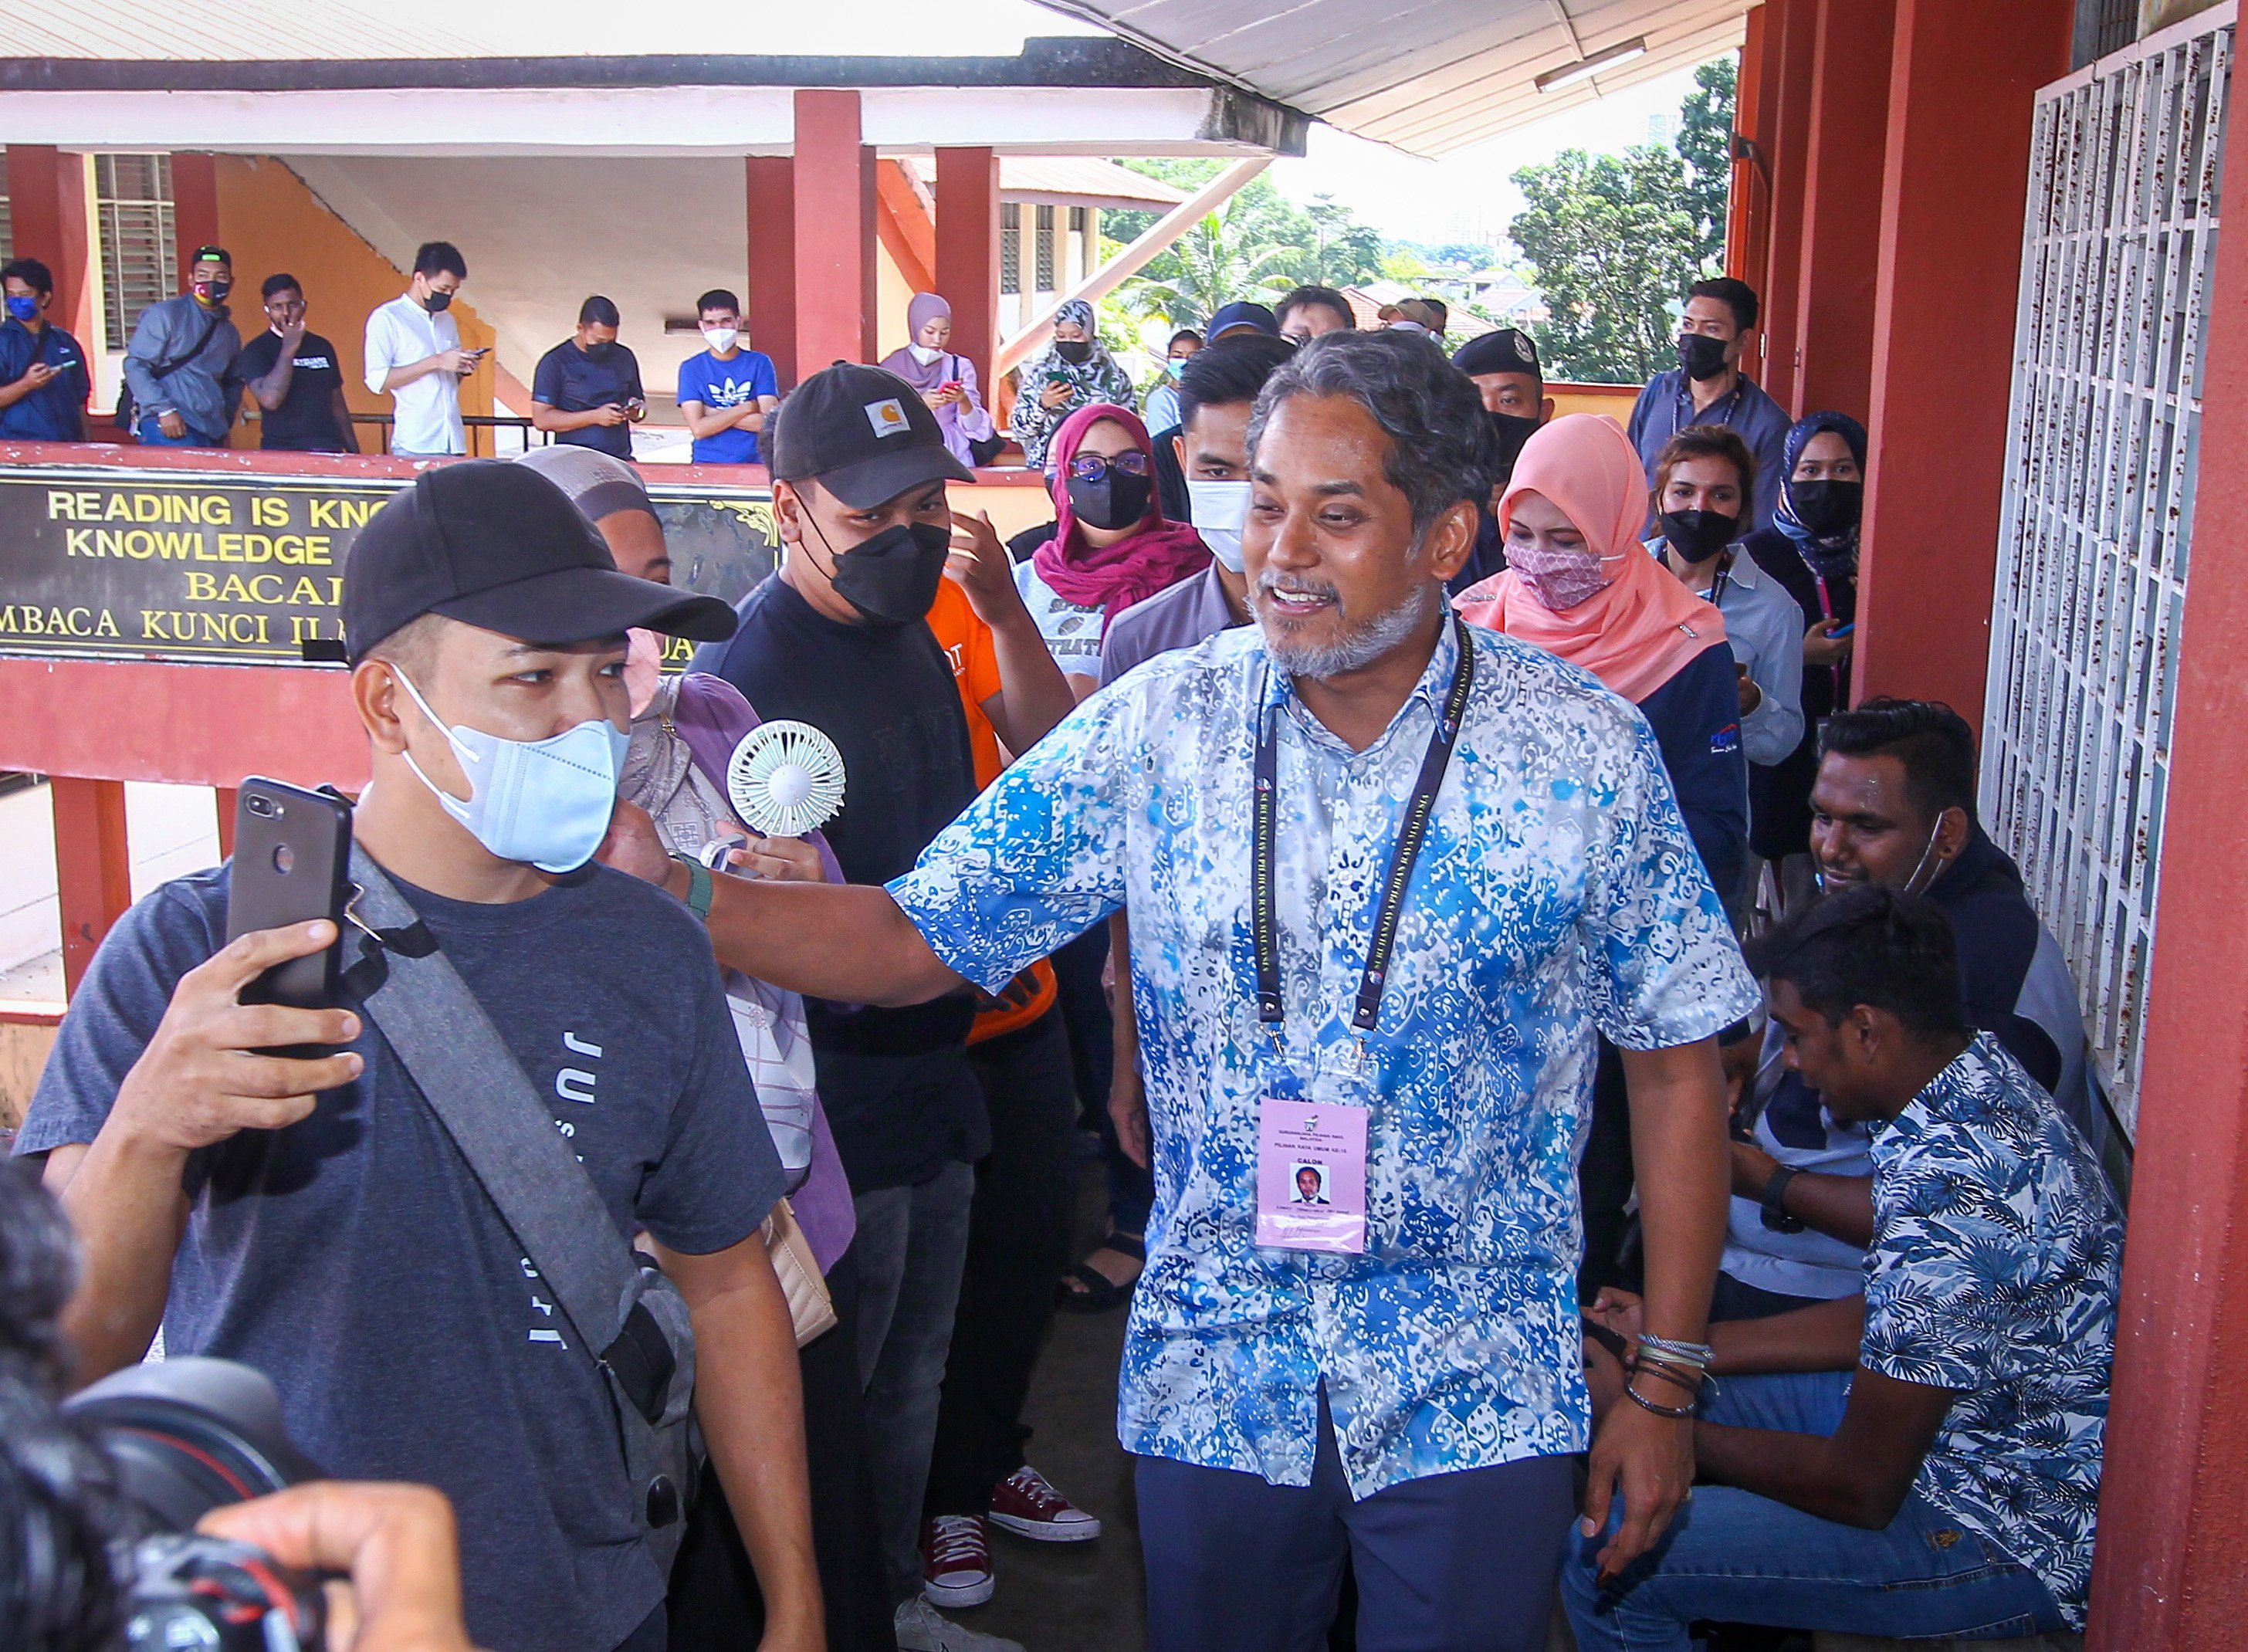 Barisan Nasional candidate for Sungai Buloh Parliament, Khairy Jamaluddin inspected the polling station in the 15th General Election in SK Kota Damansara Section 7. - NSTP/ AZIAH AZMEE